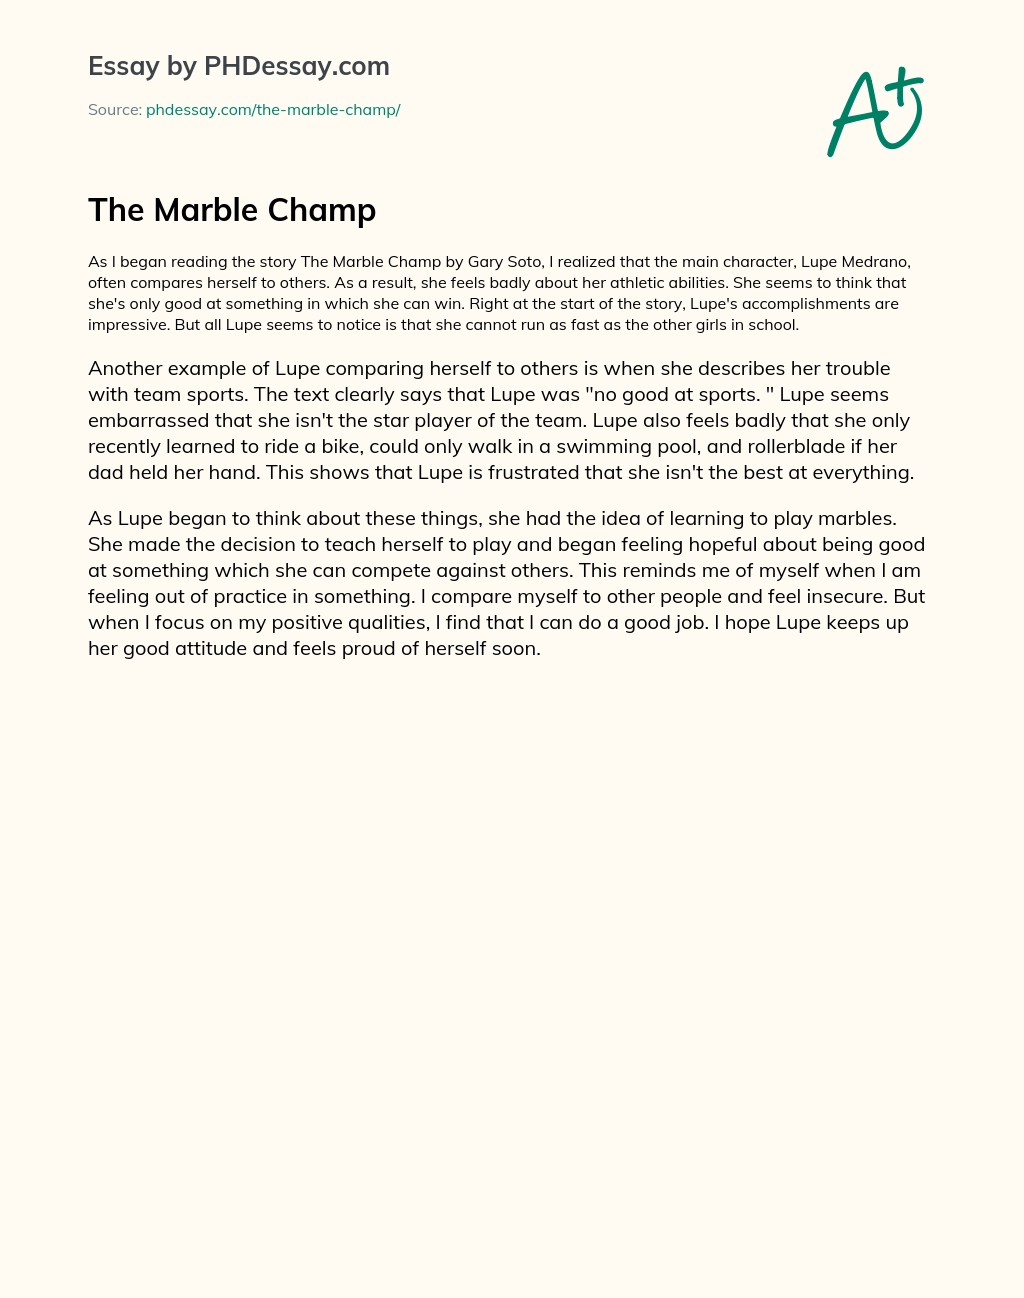 The Marble Champ essay